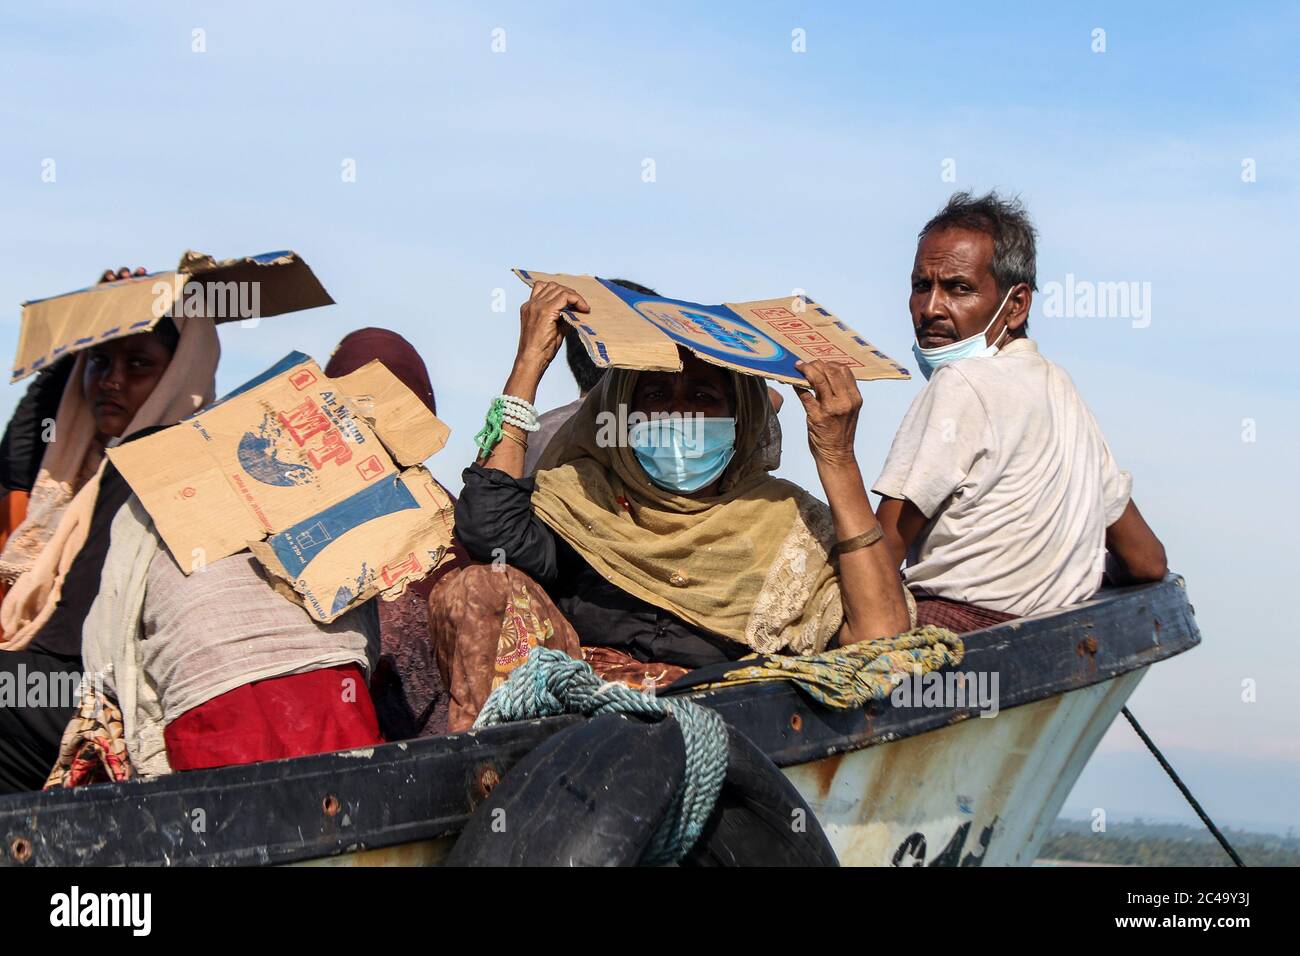 Aceh Utara, Indonesia. 25th June, 2020. Rohingya people seen on a stranded wooden boat using box papers to protect themselves from the sun 1 kilometre from the coast in North Aceh Regency.According to local officials, as many as 94 Rohingyas were found by Acehnese fishermen stranded in the middle of the sea waters 1 kilometre from the coast off Aceh Province using wooden boats. Credit: SOPA Images Limited/Alamy Live News Stock Photo